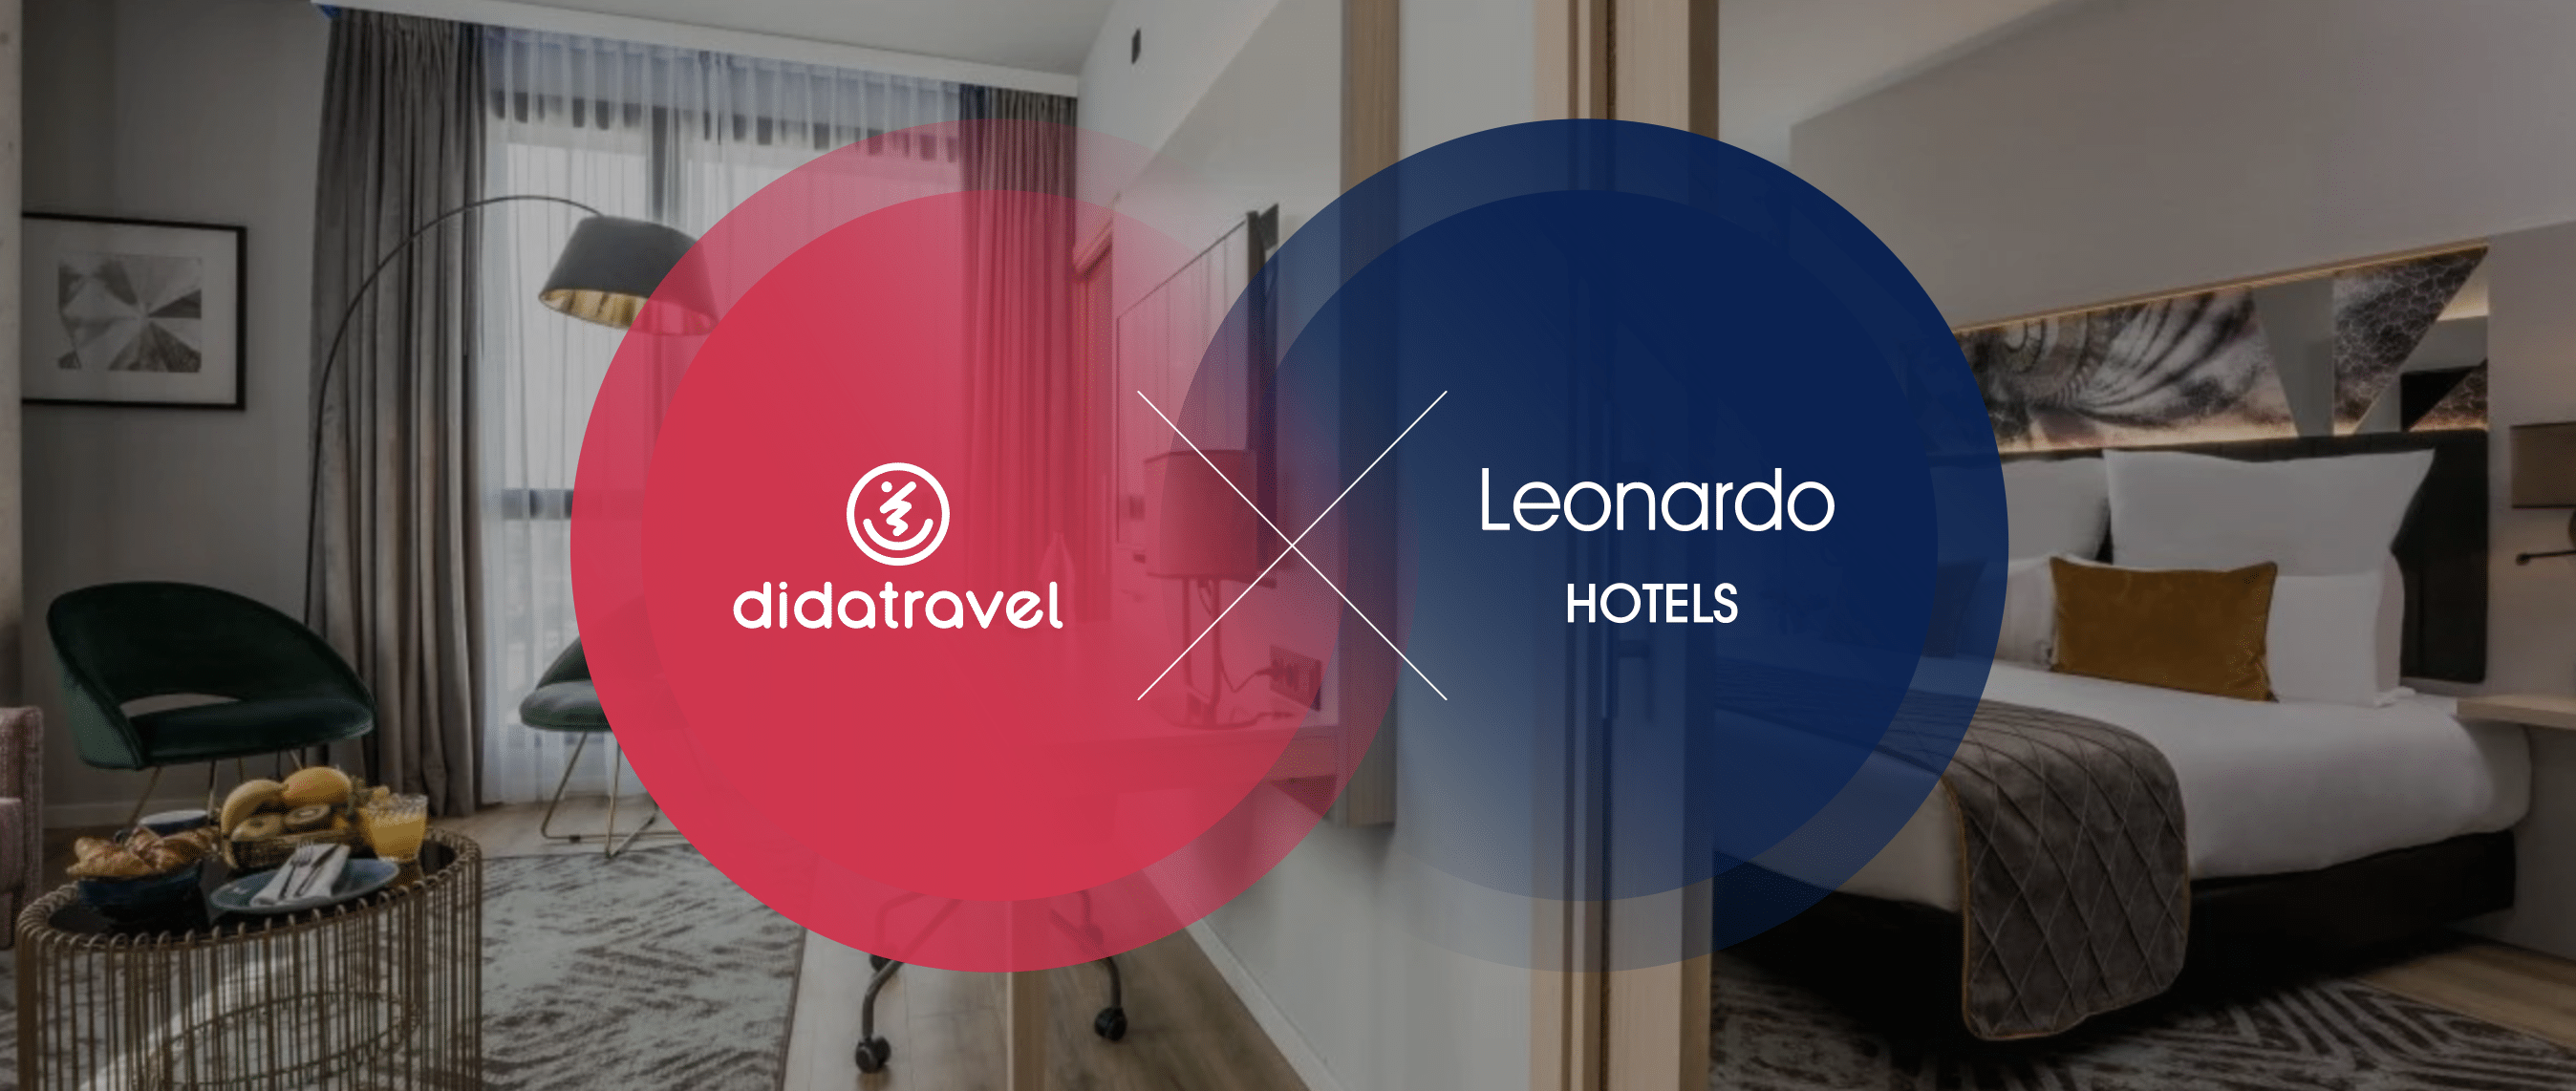 Leonardo Hotels Central Europe Chooses B2b Sales Route With Didatravel